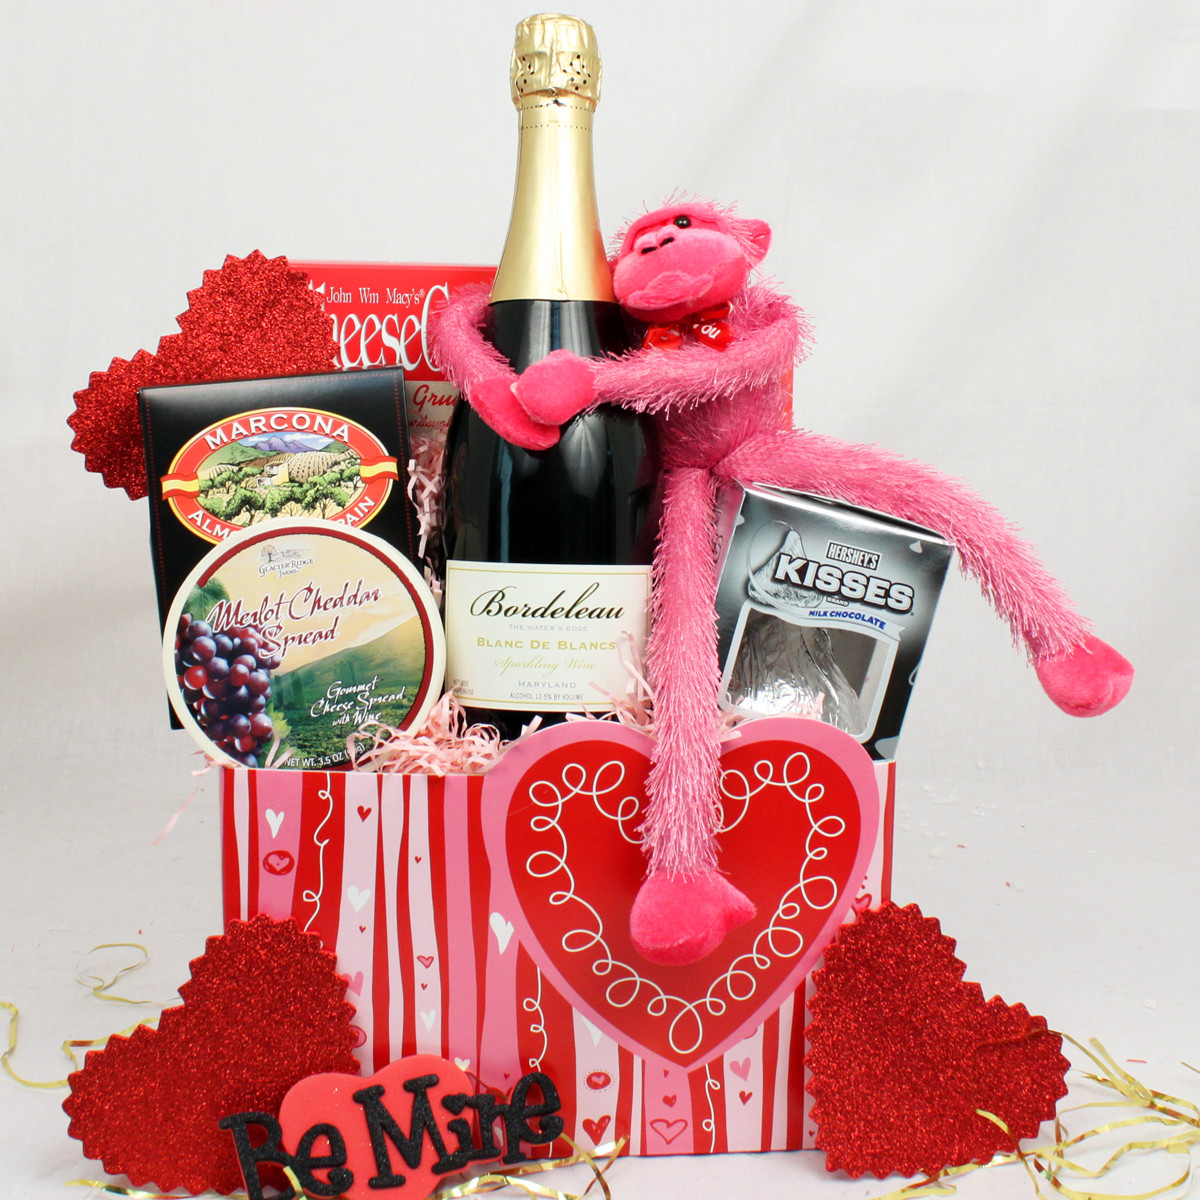 Gift Ideas For Her Valentines
 Creative and Thoughtful Valentine’s Day Gifts for Her